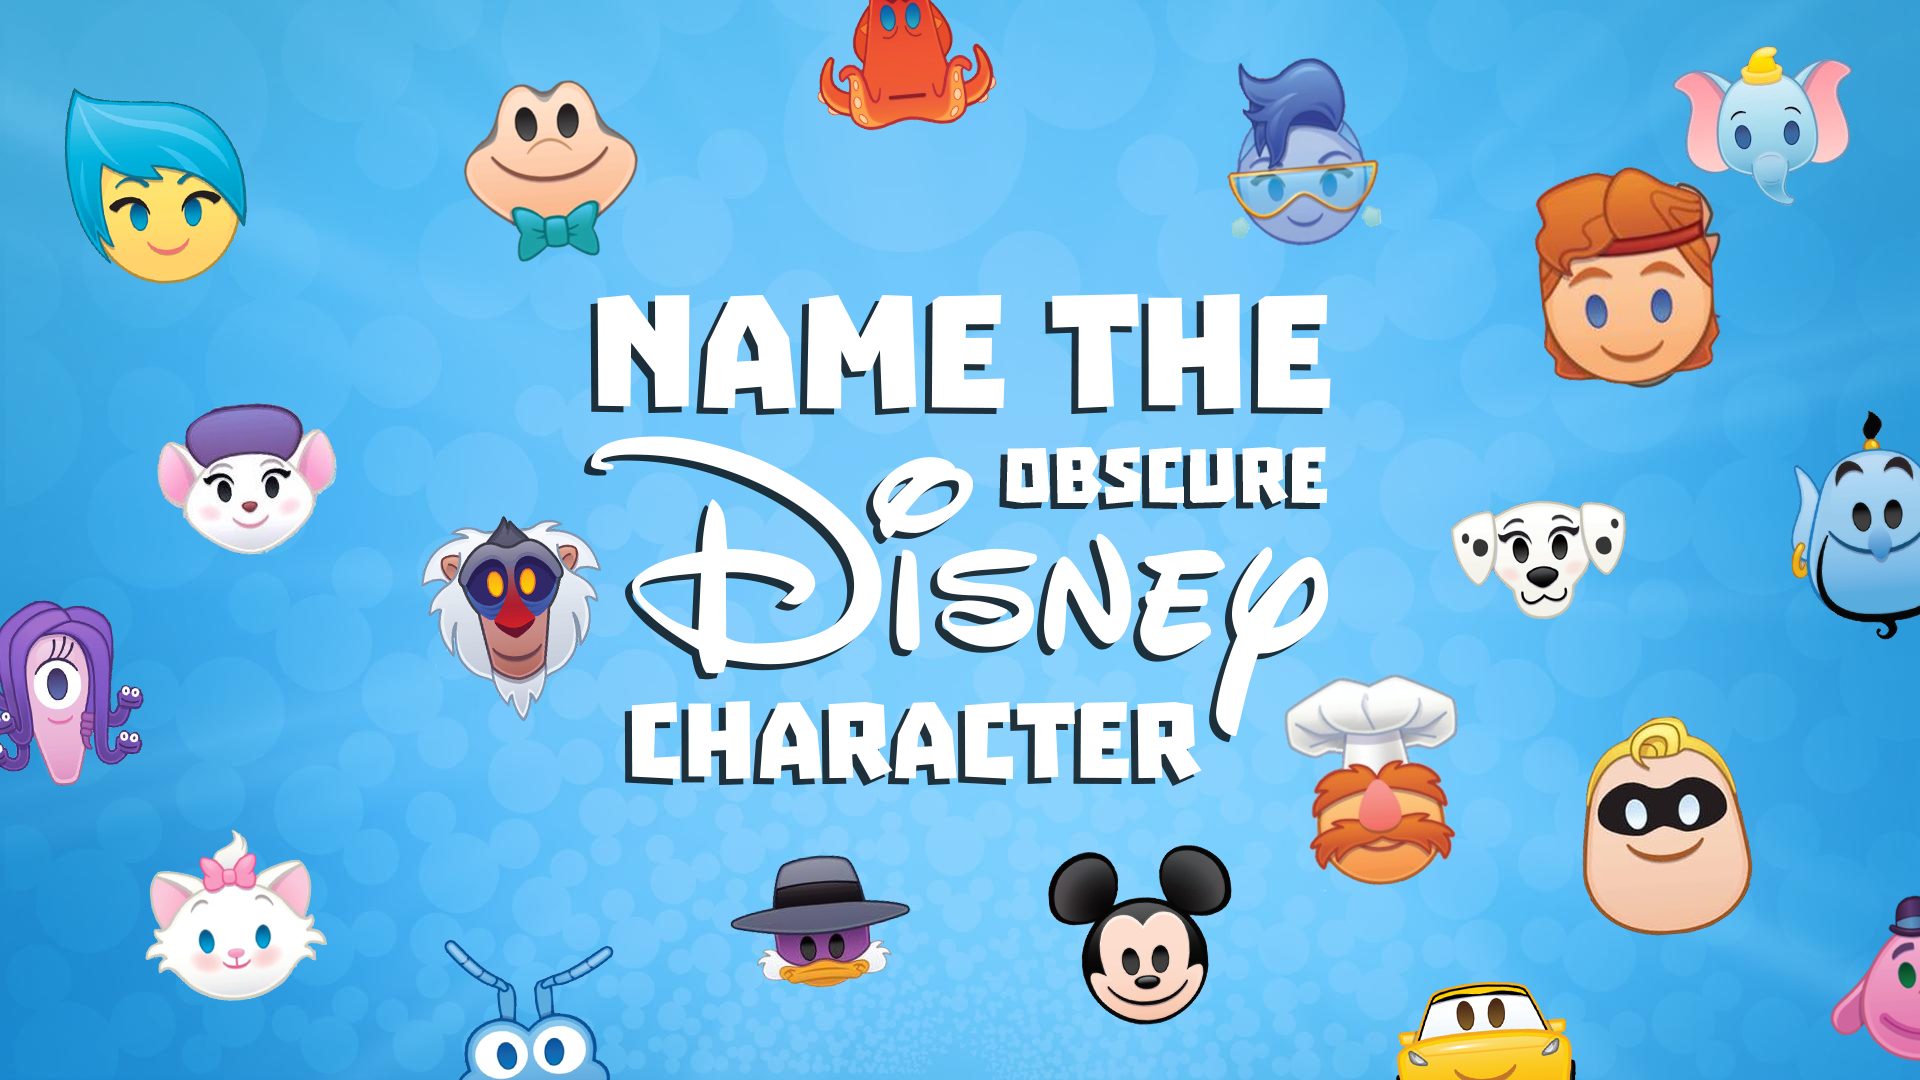 QUIZ: Name The Obscure Disney Character